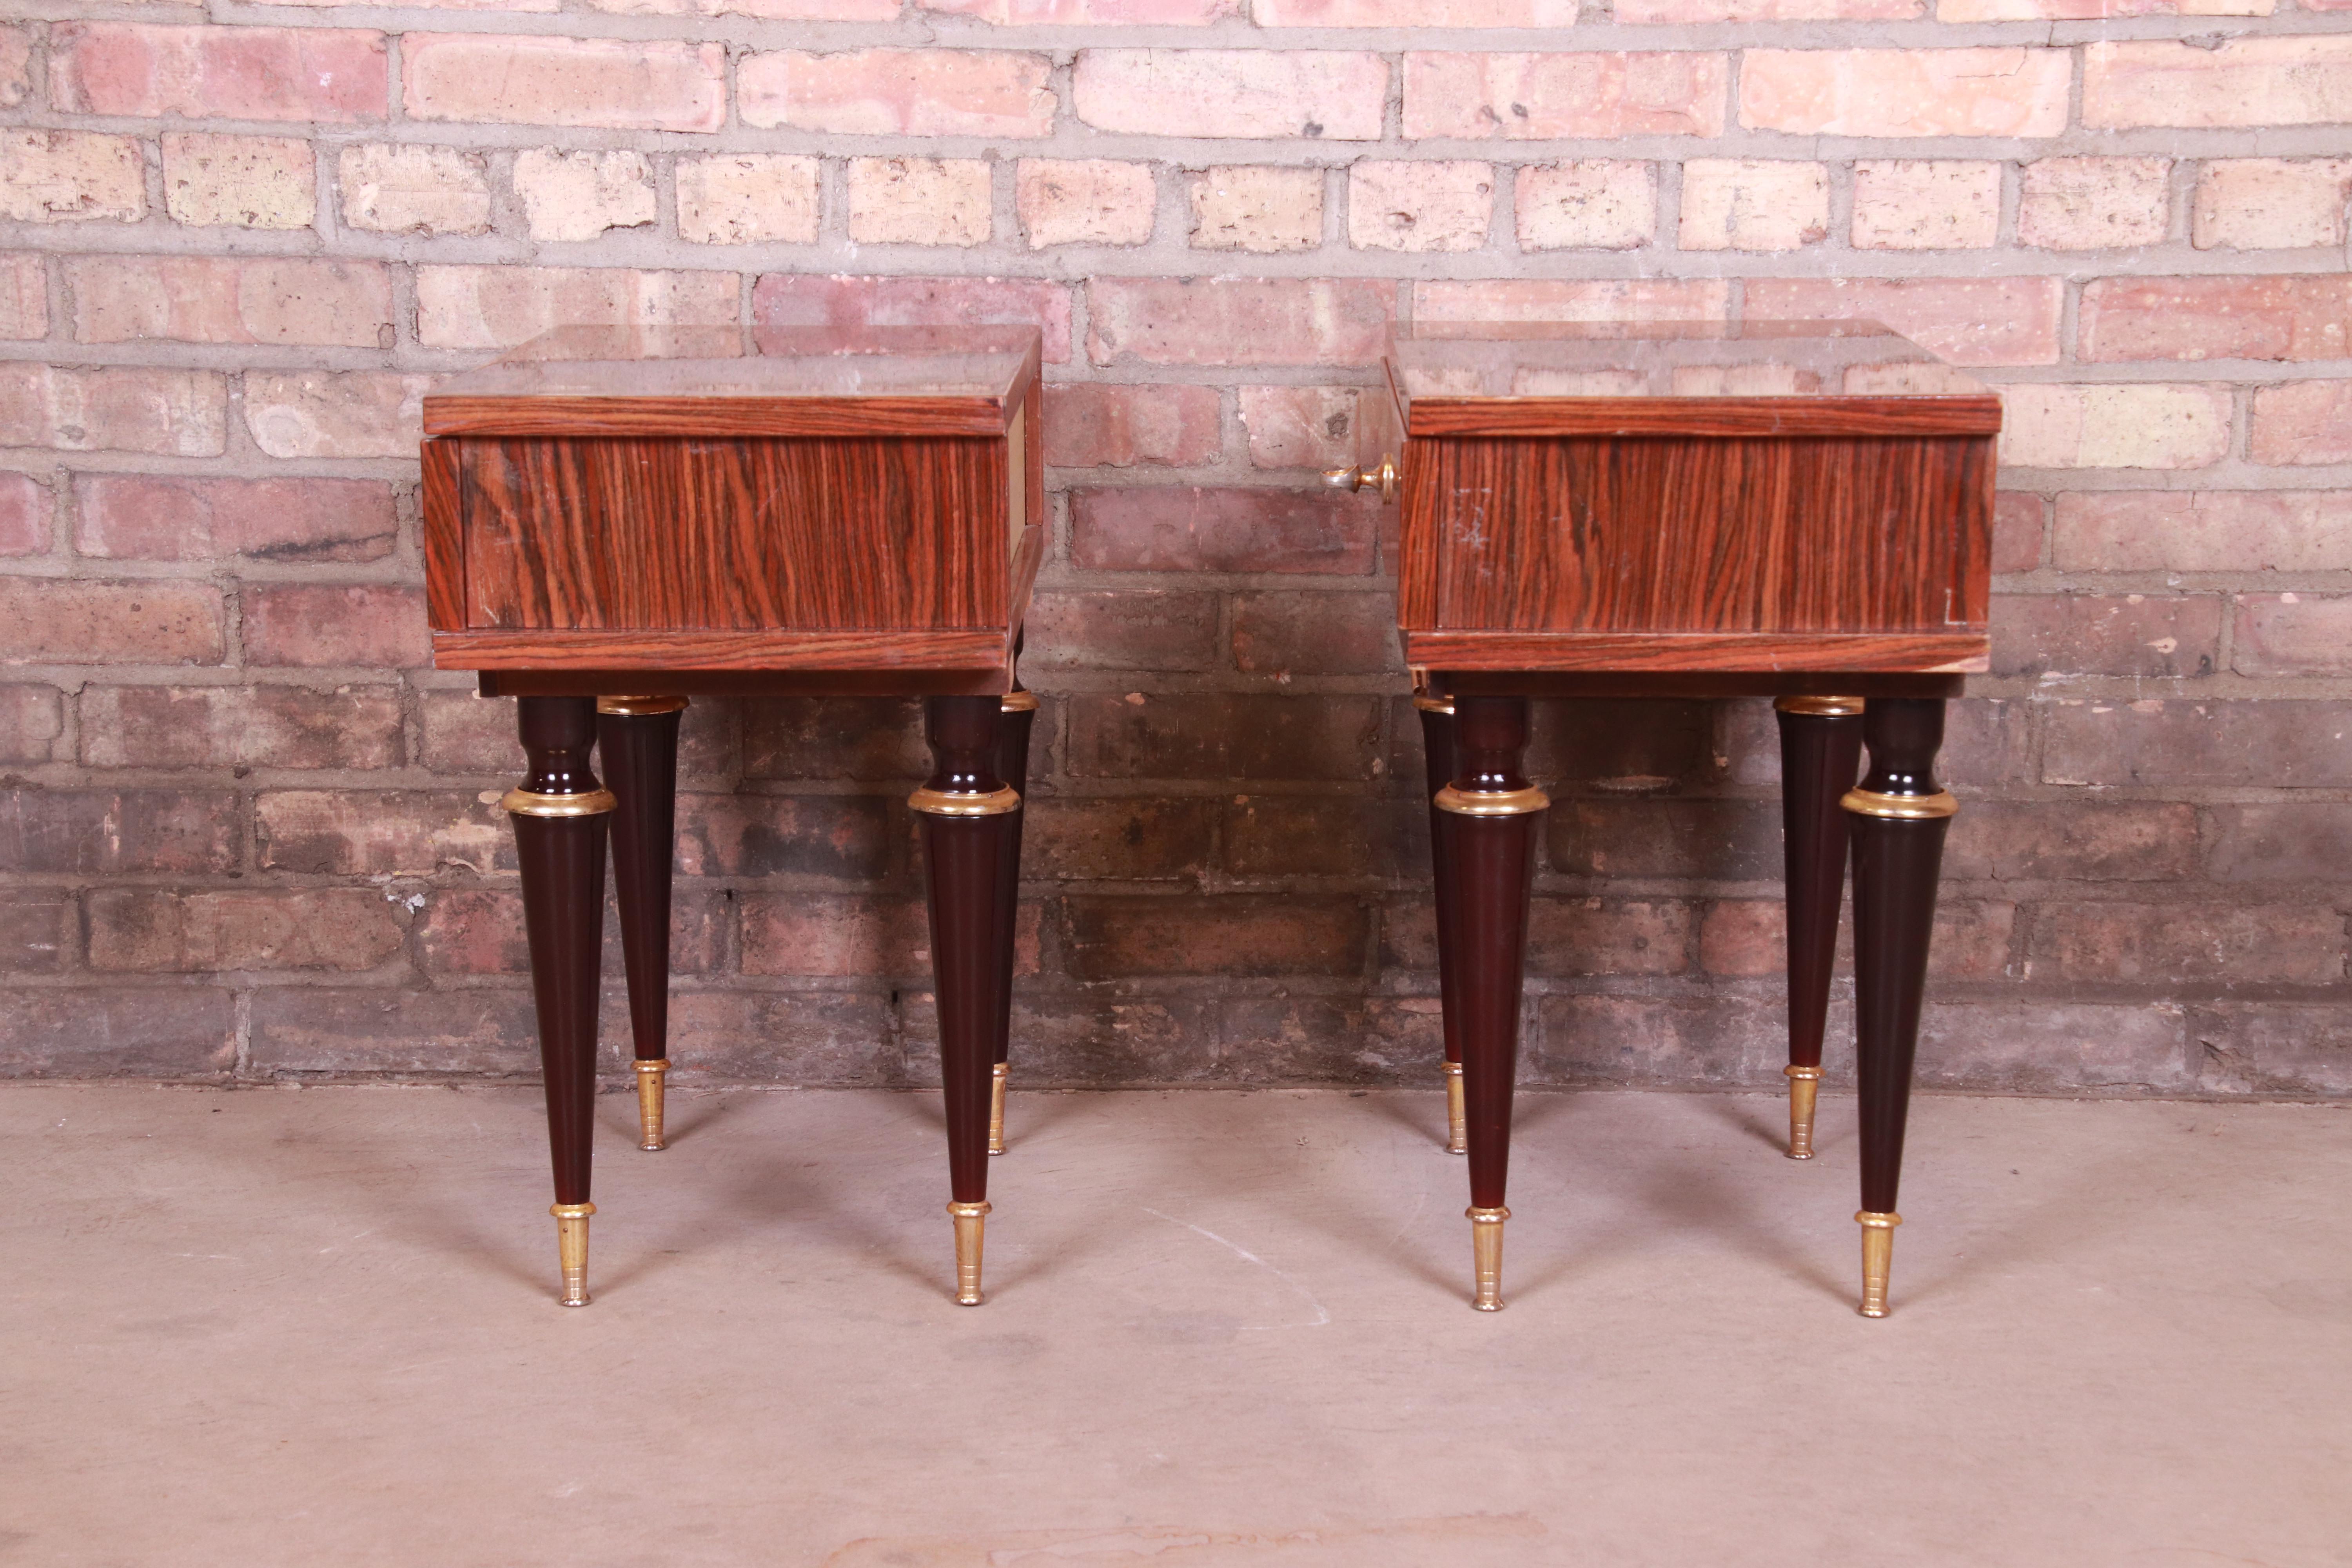 French Art Deco Macassar Ebony Inlaid Marquetry Nightstands, Circa 1950s For Sale 6